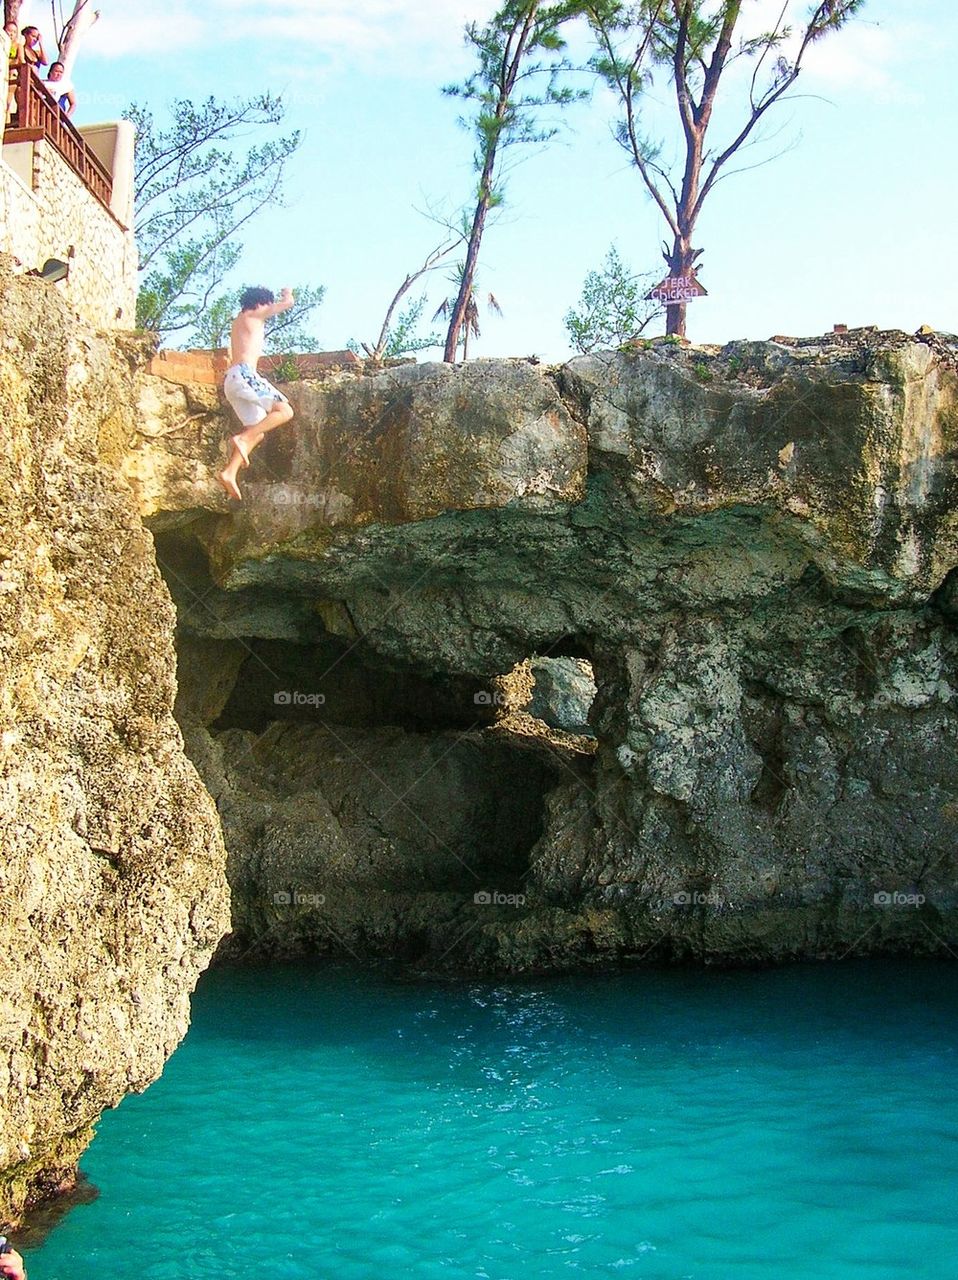 Cliff jumping in Jamaica